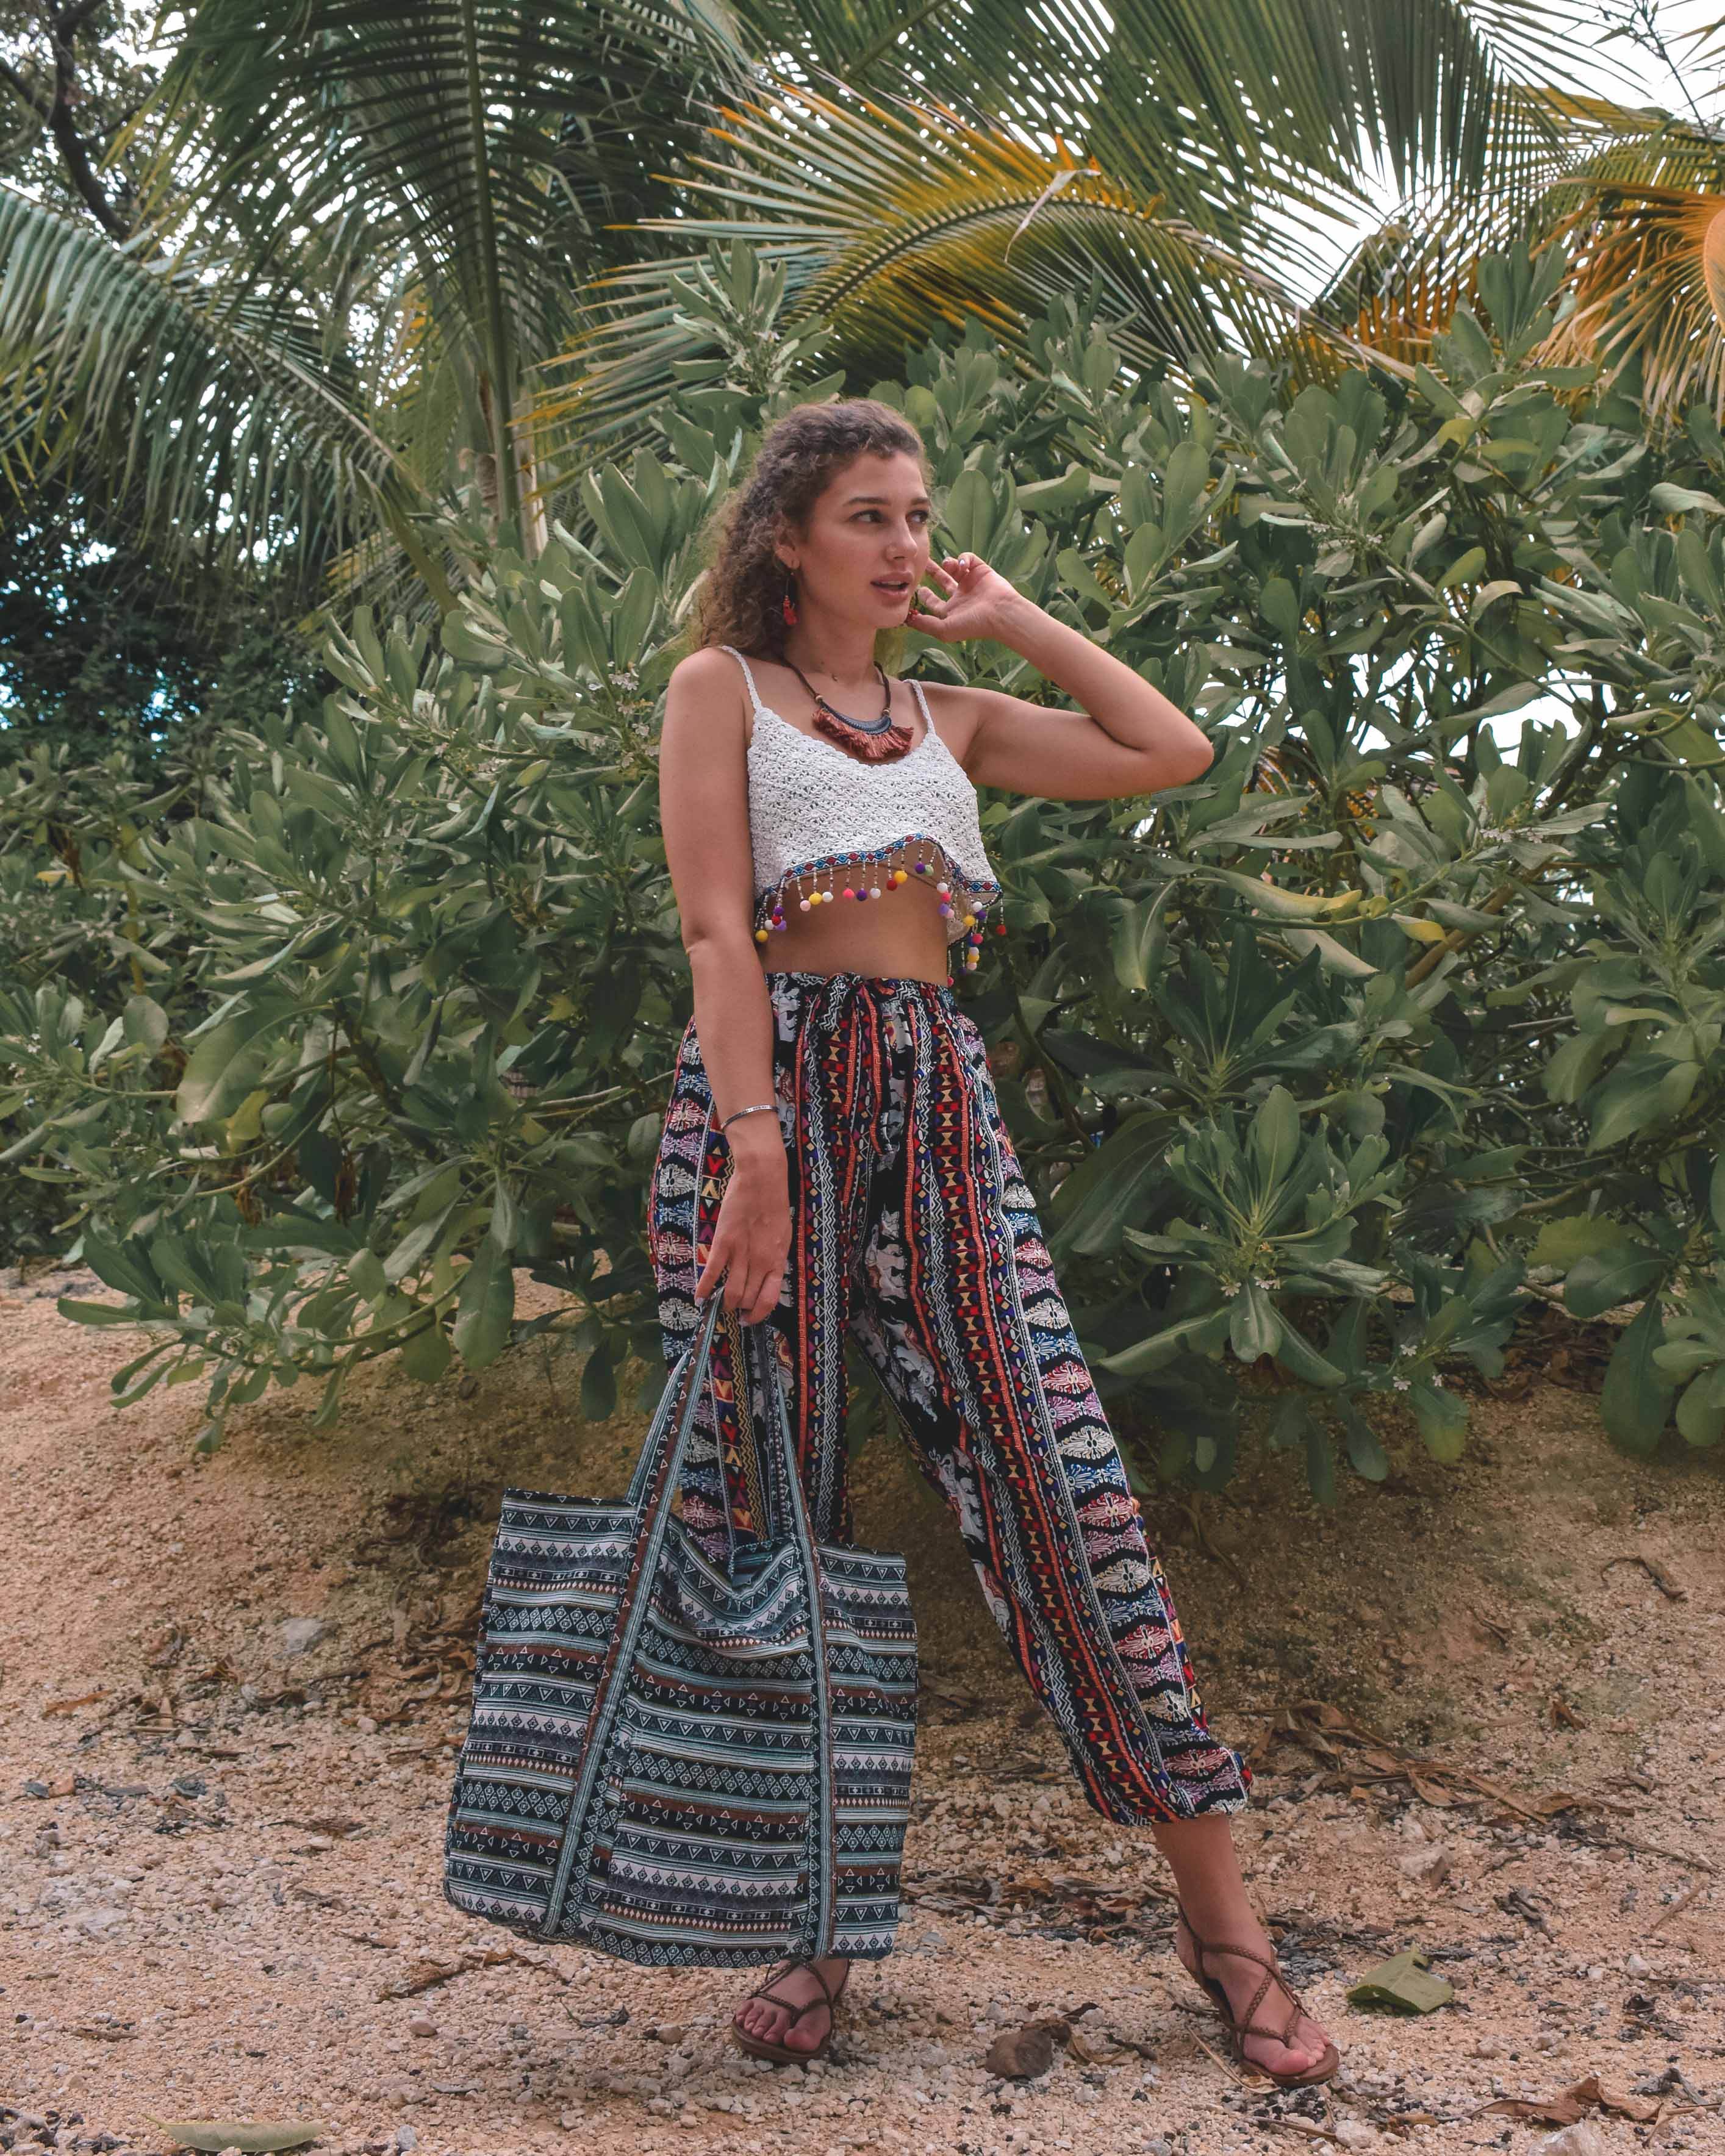 VENUS TOP Elepanta Crochet Tops - Buy Today Elephant Pants Jewelry And Bohemian Clothes Handmade In Thailand Help To Save The Elephants FairTrade And Vegan